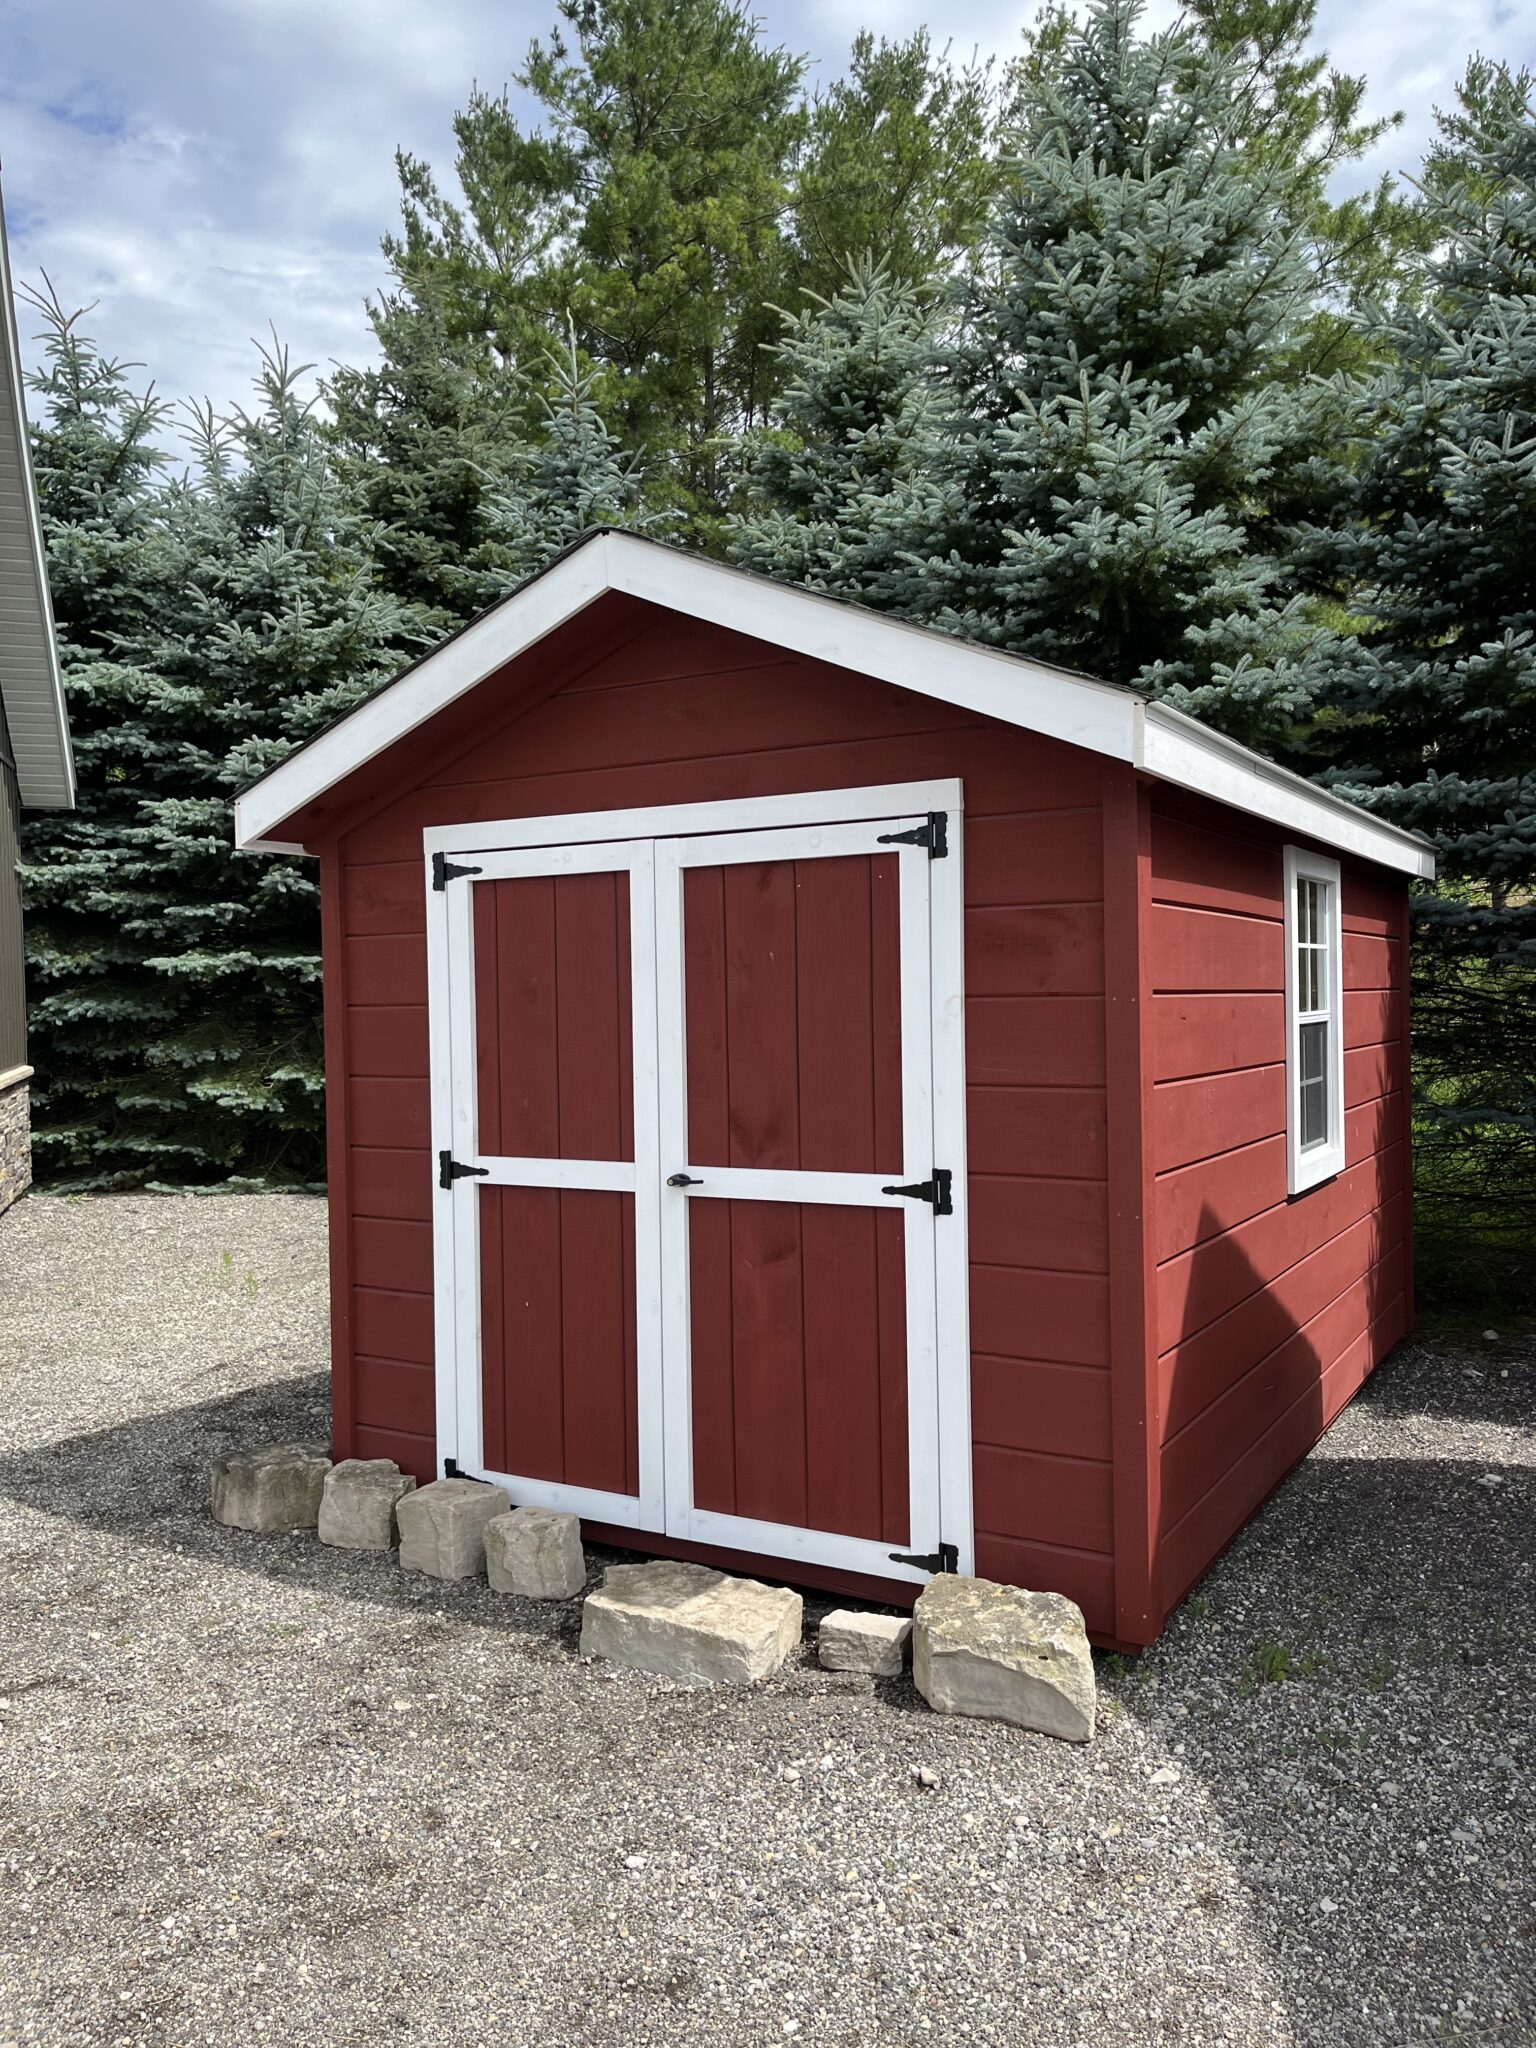 Denco Clearance Sheds & Barns, Discount Bunkies & Cottages